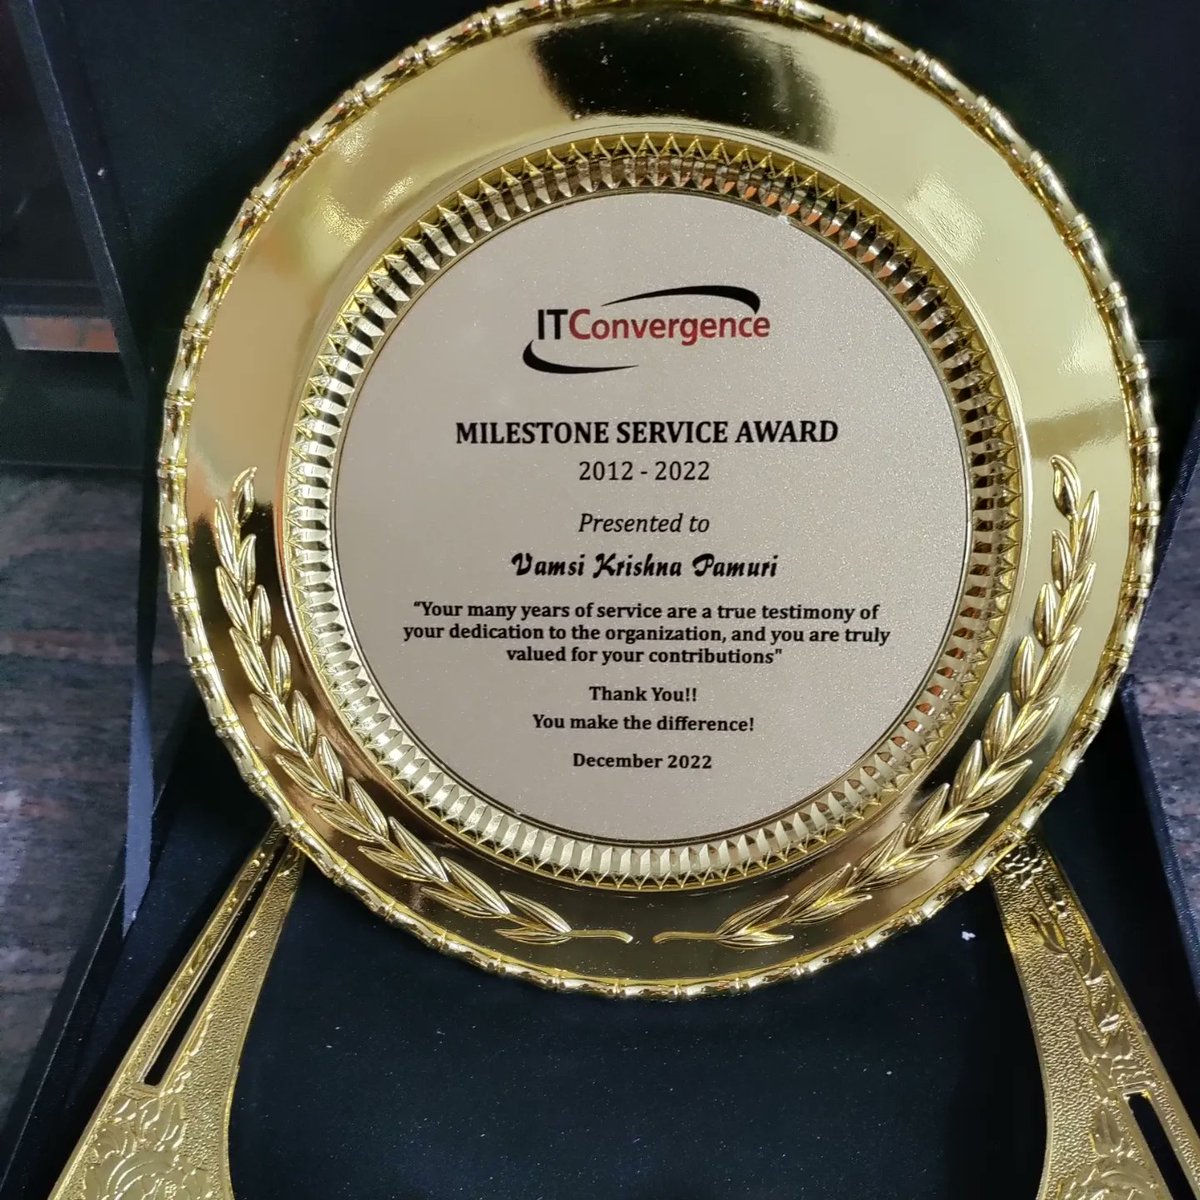 Received a milestone service award from my company #itconvergence Thanks to my family, colleagues and well wishers for your utmost support encouragement throughout this journery 🙏 😀 
#longserviceaward #recognition #work #milestone